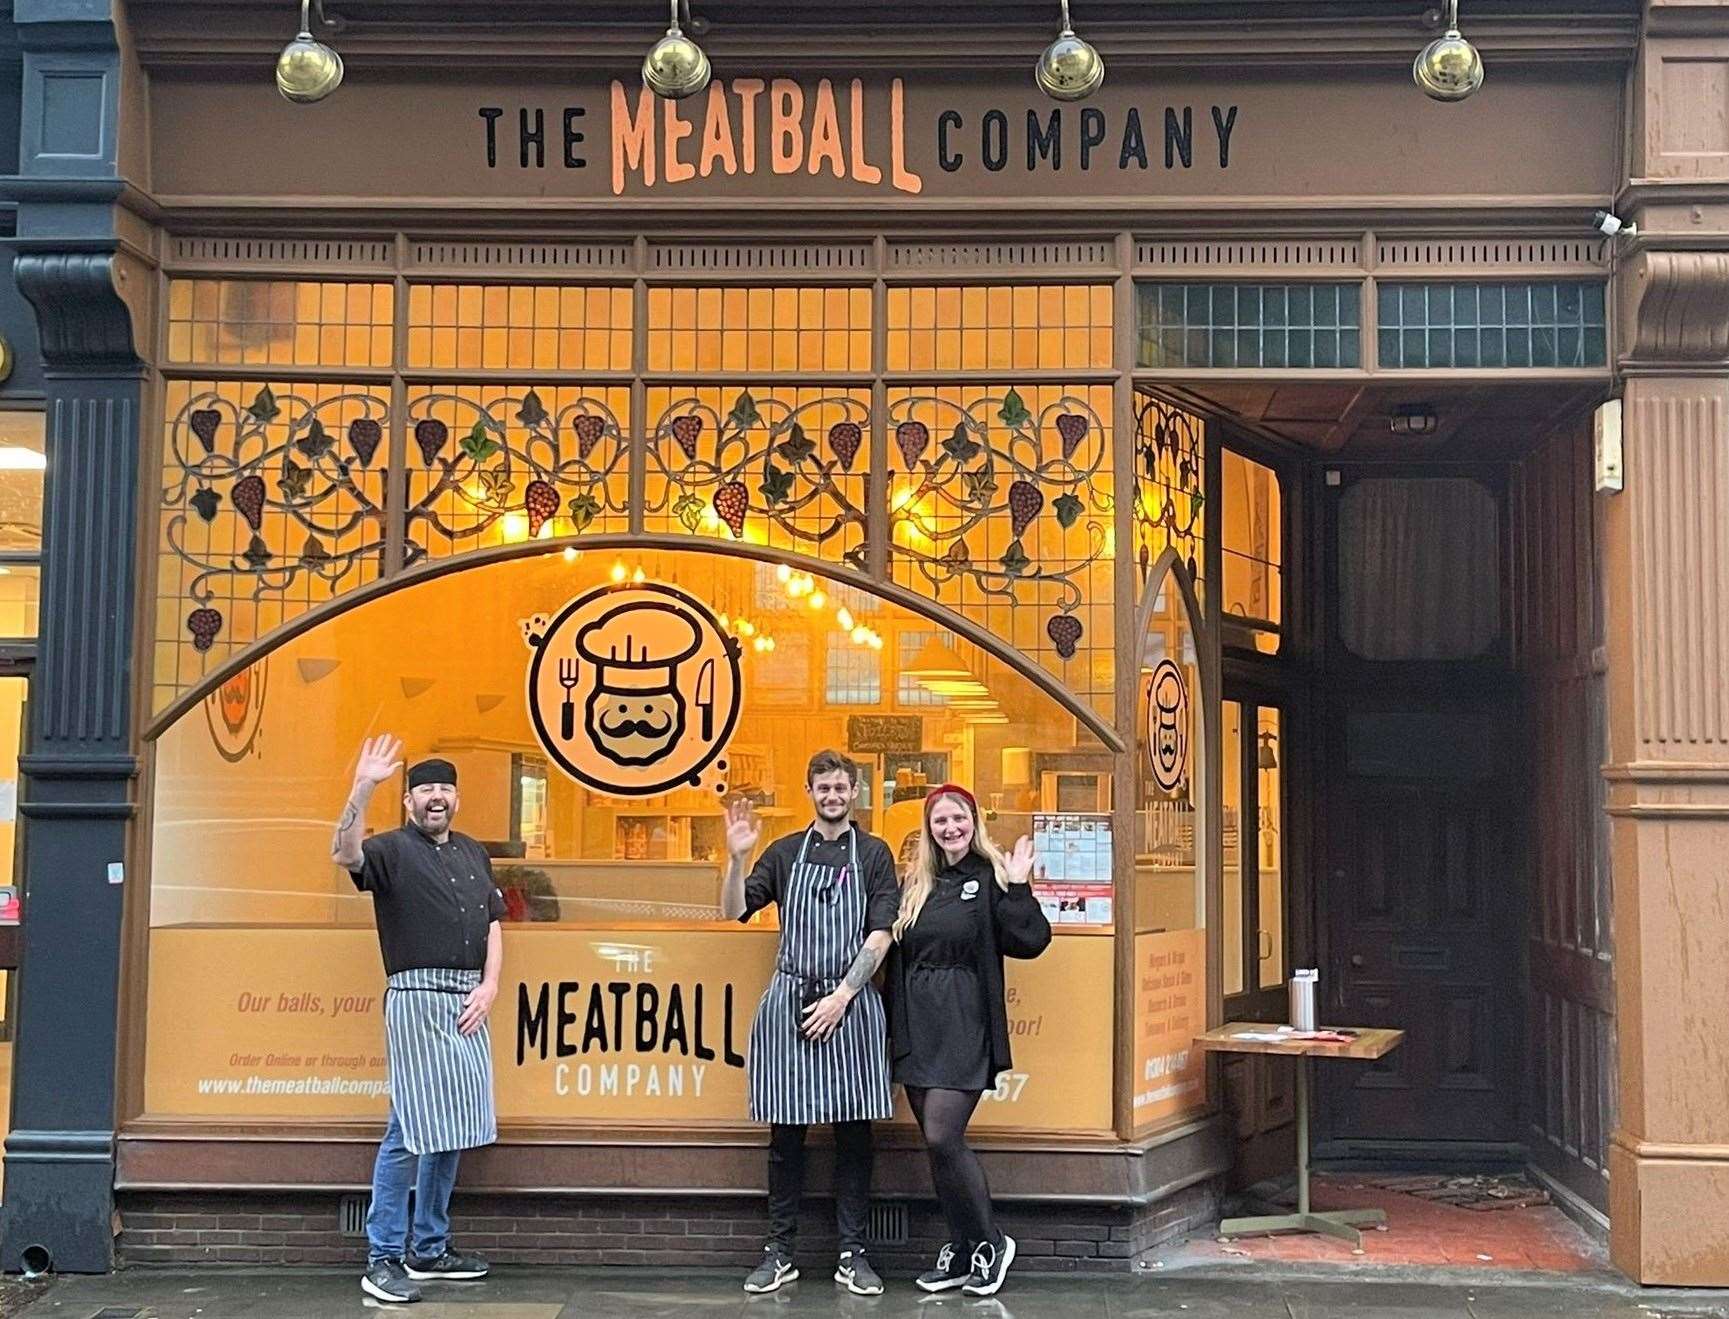 The Meatball Company has opened in Dover. From left to right: Peter Cullen, George Virgin and Aimee Wilkinson